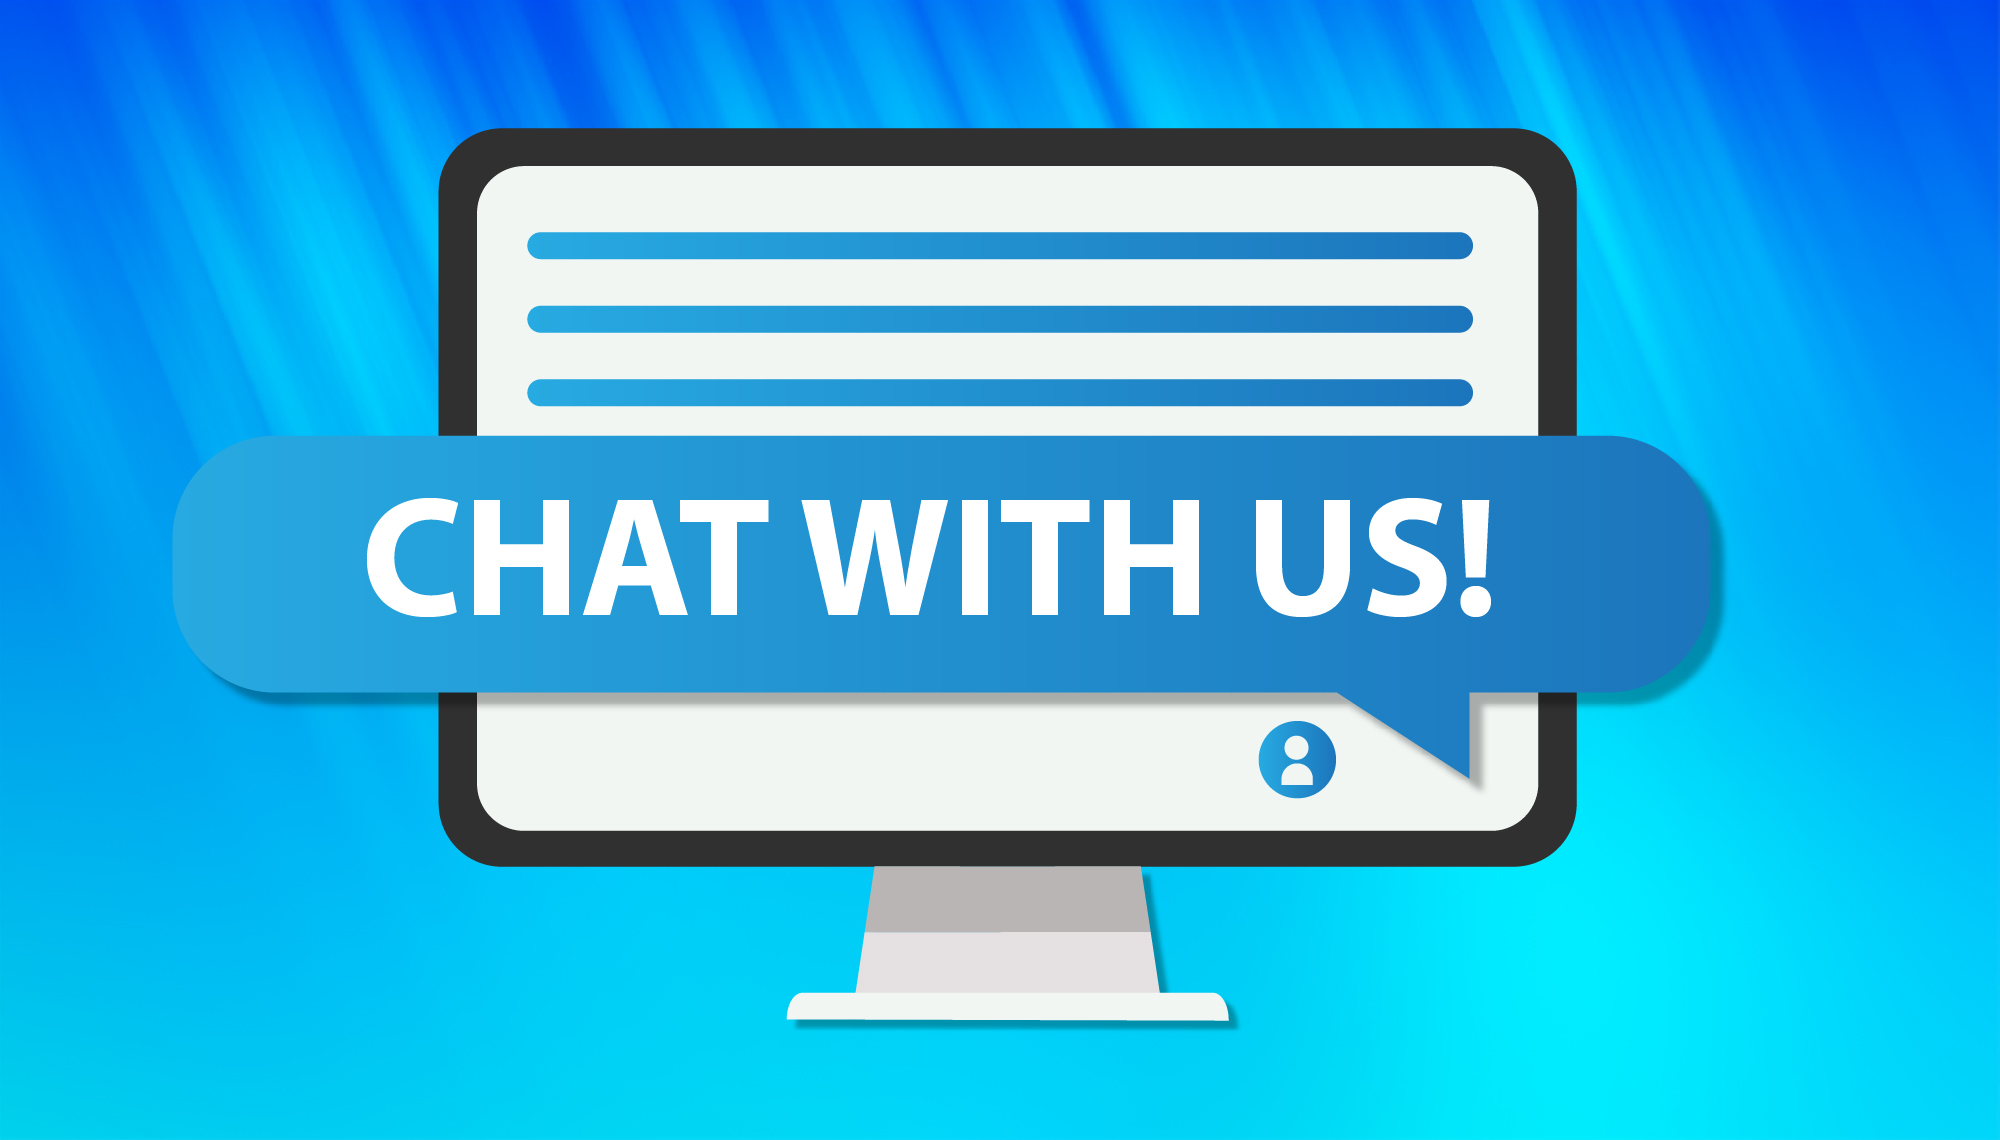 Chat with us!